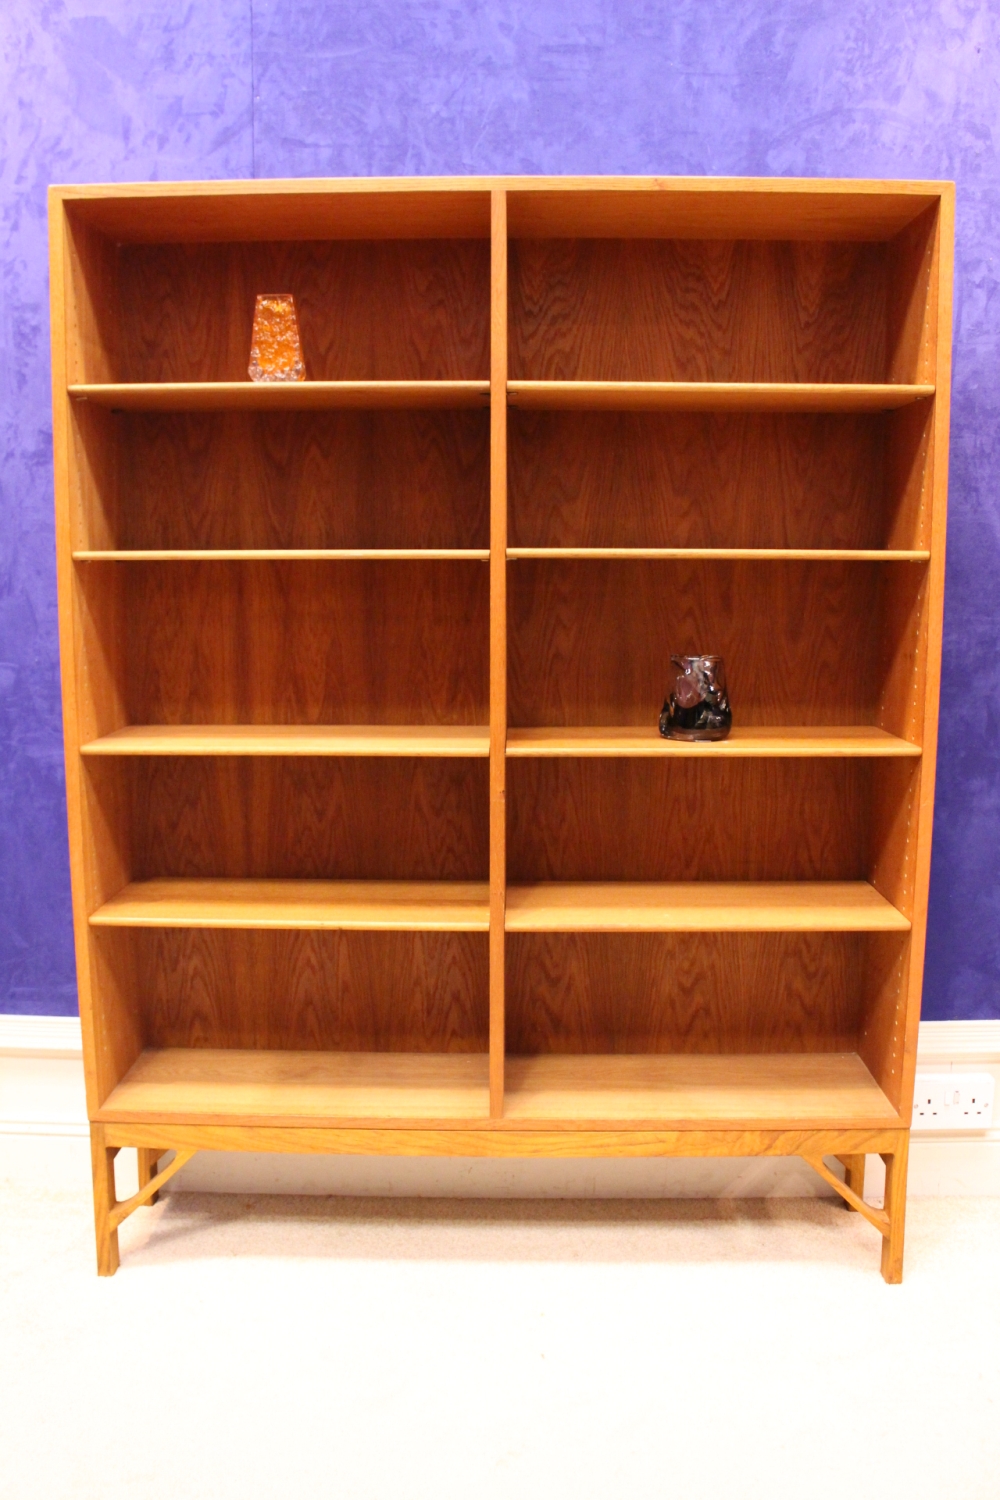 A PAIR OF OAK MID CENTURY MODERN, BORGE MOGENSEN FOR FDB MOBELFABRIK OPEN BOOKCASES, Danish, with - Image 3 of 5